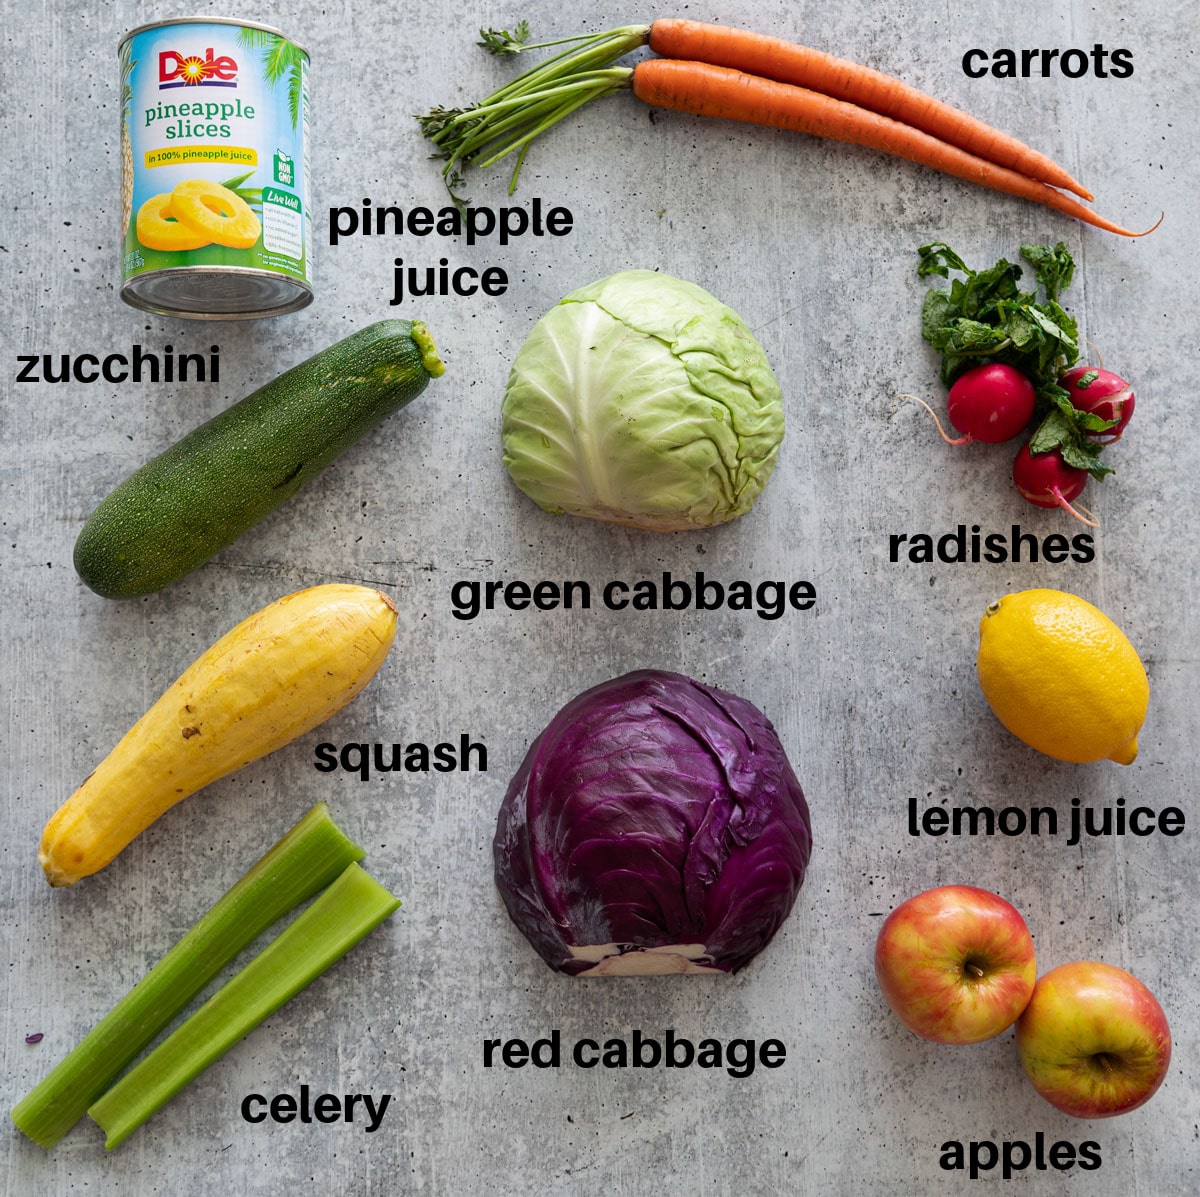 Vegetables in a counter used to make healthy coleslaw: carrots, cabbage, zucchini, squash, celery, radishes, fruit. 